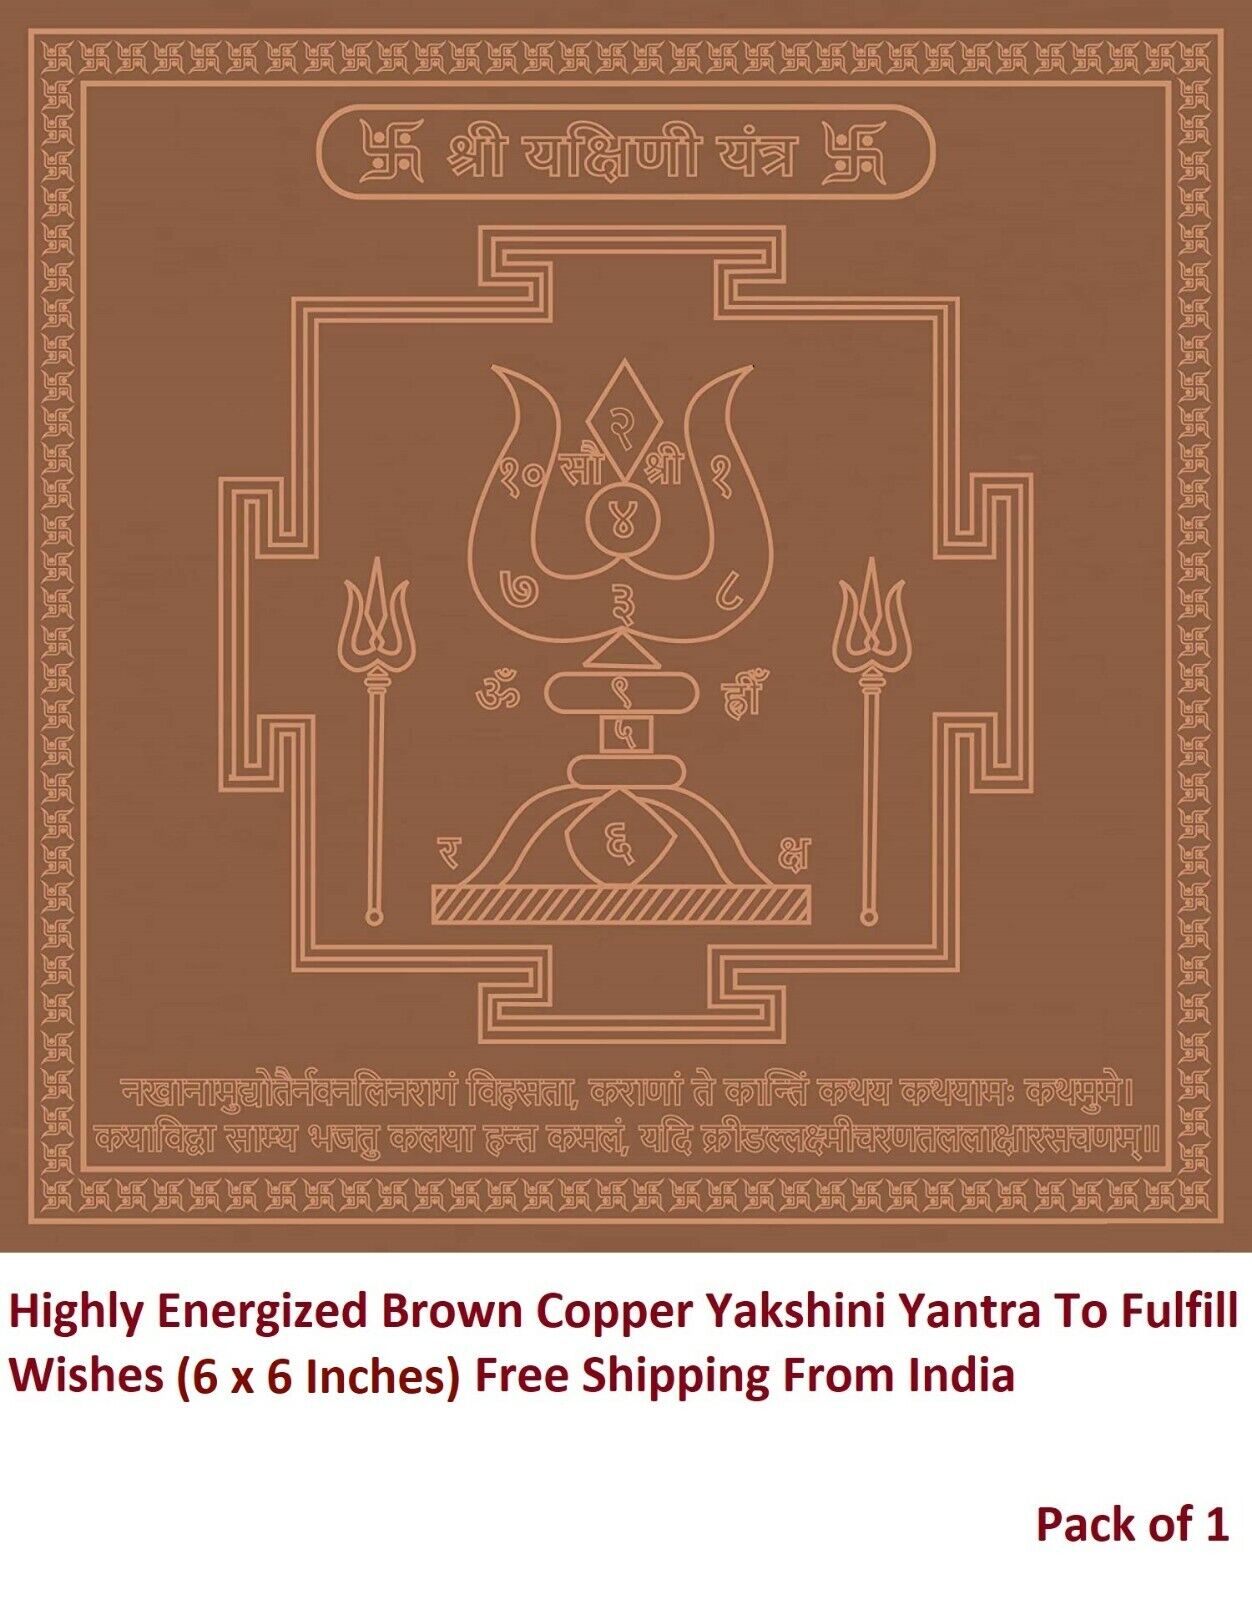 1 x Brown Color Copper Yakshini Yantra For Fulfill Wishes (6 x 6 Inches)